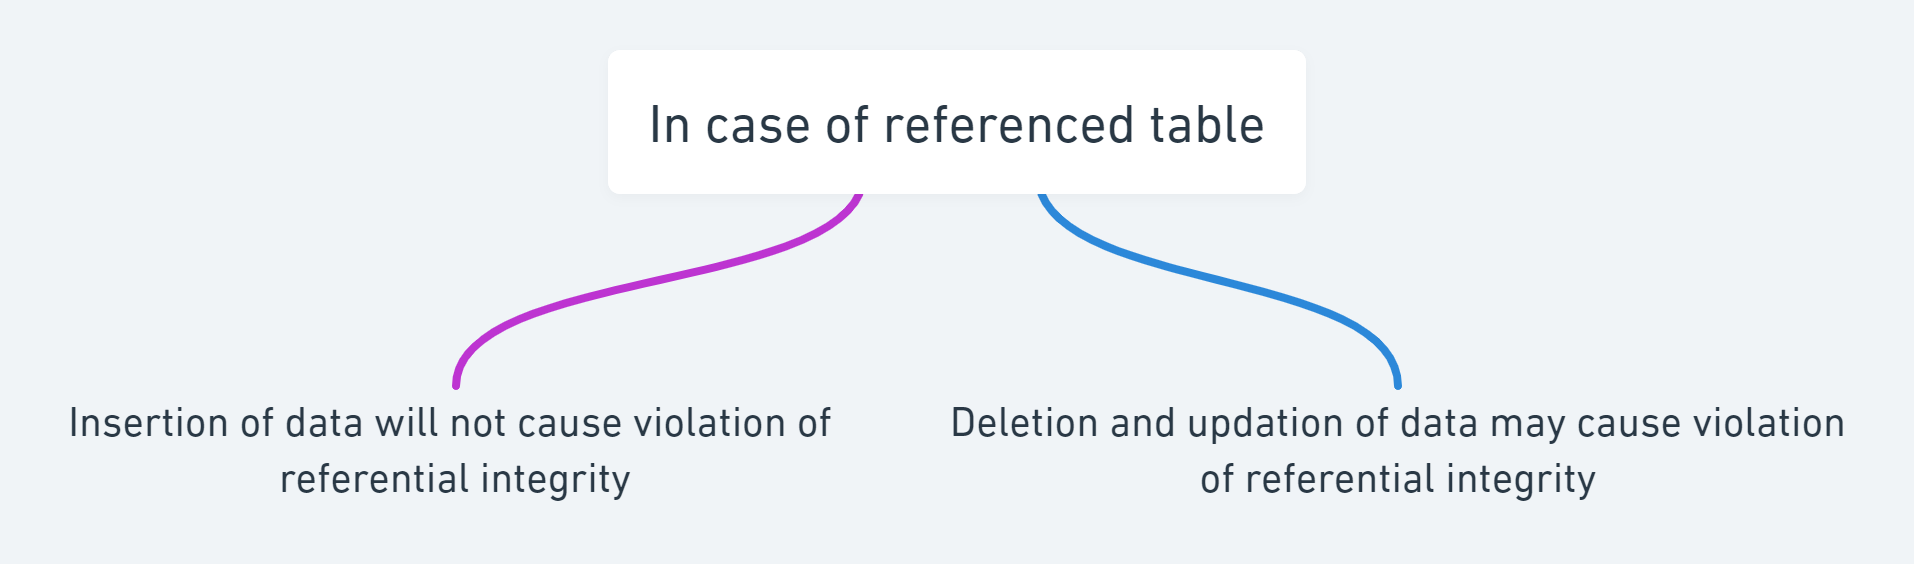 In case of referenced table@2x.png